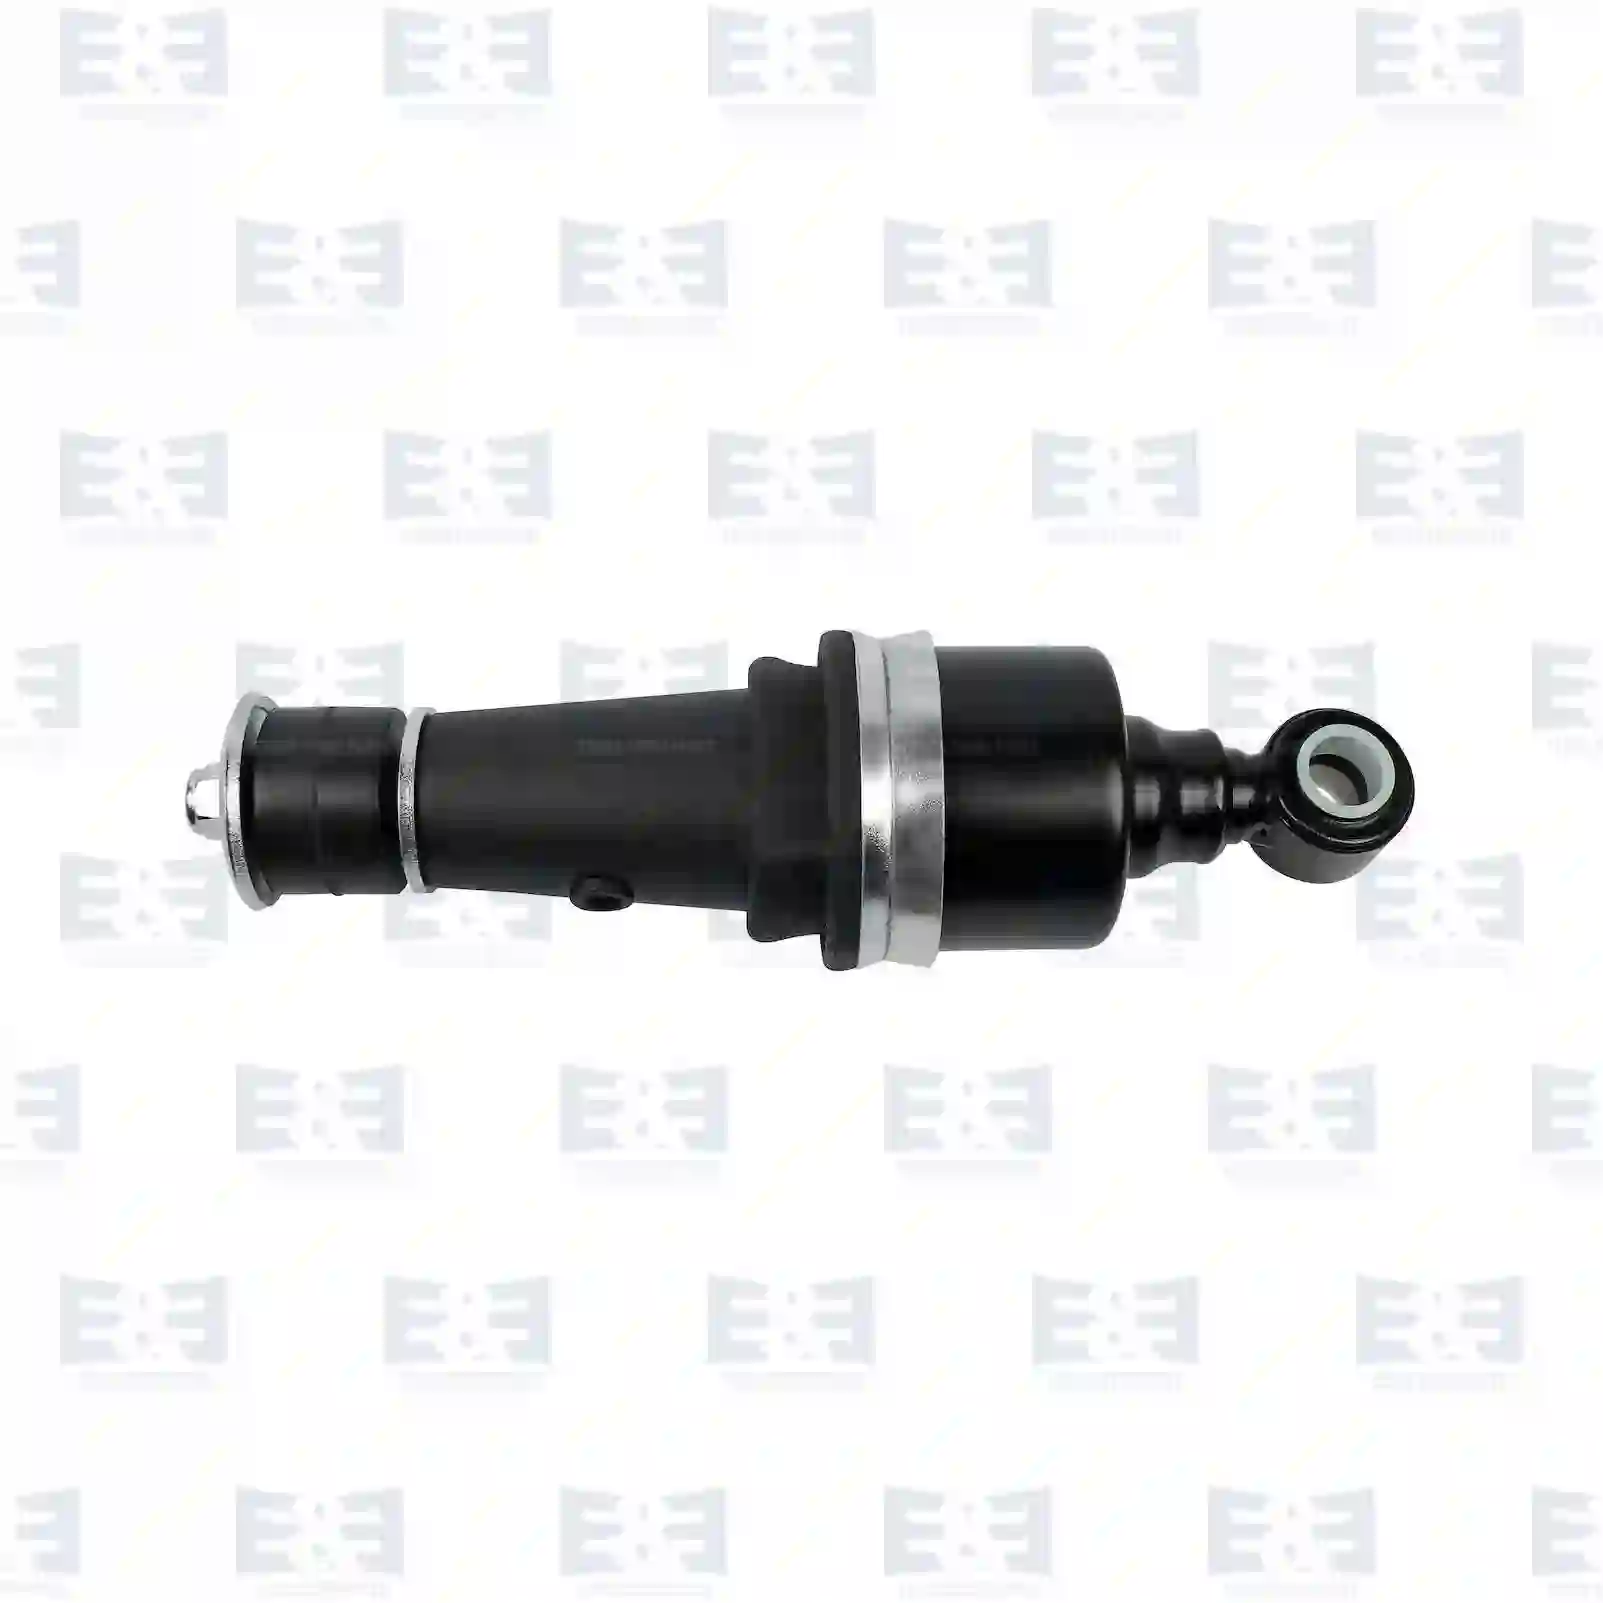 Shock Absorber Cabin shock absorber, with air bellow, EE No 2E2276562 ,  oem no:0375224, 1245580, 1265281, 1285393, 1321590, 1353450, 1353453, 1371065, 1444147, 1622211, 375224, ZG41219-0008 E&E Truck Spare Parts | Truck Spare Parts, Auotomotive Spare Parts